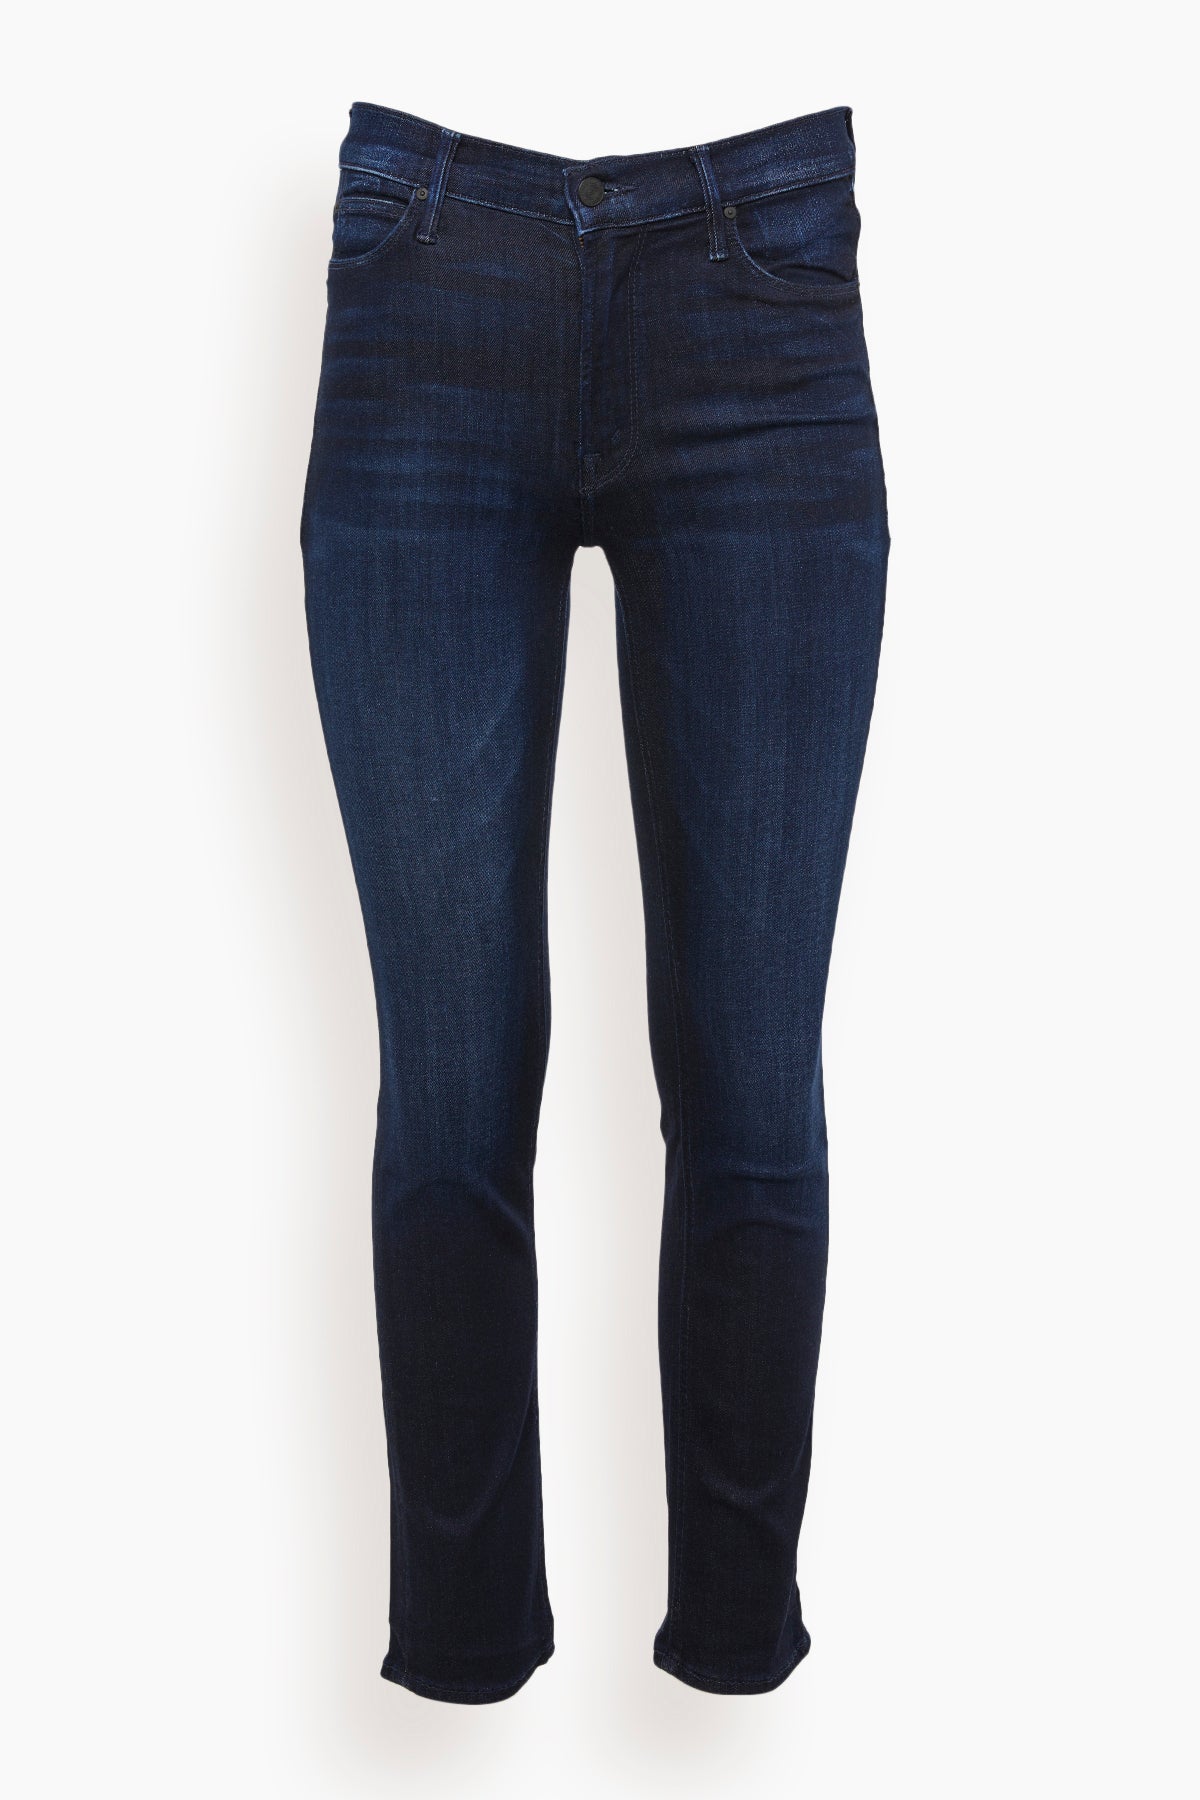 The Mid Rise Dazzler Ankle Jean in Now or Never